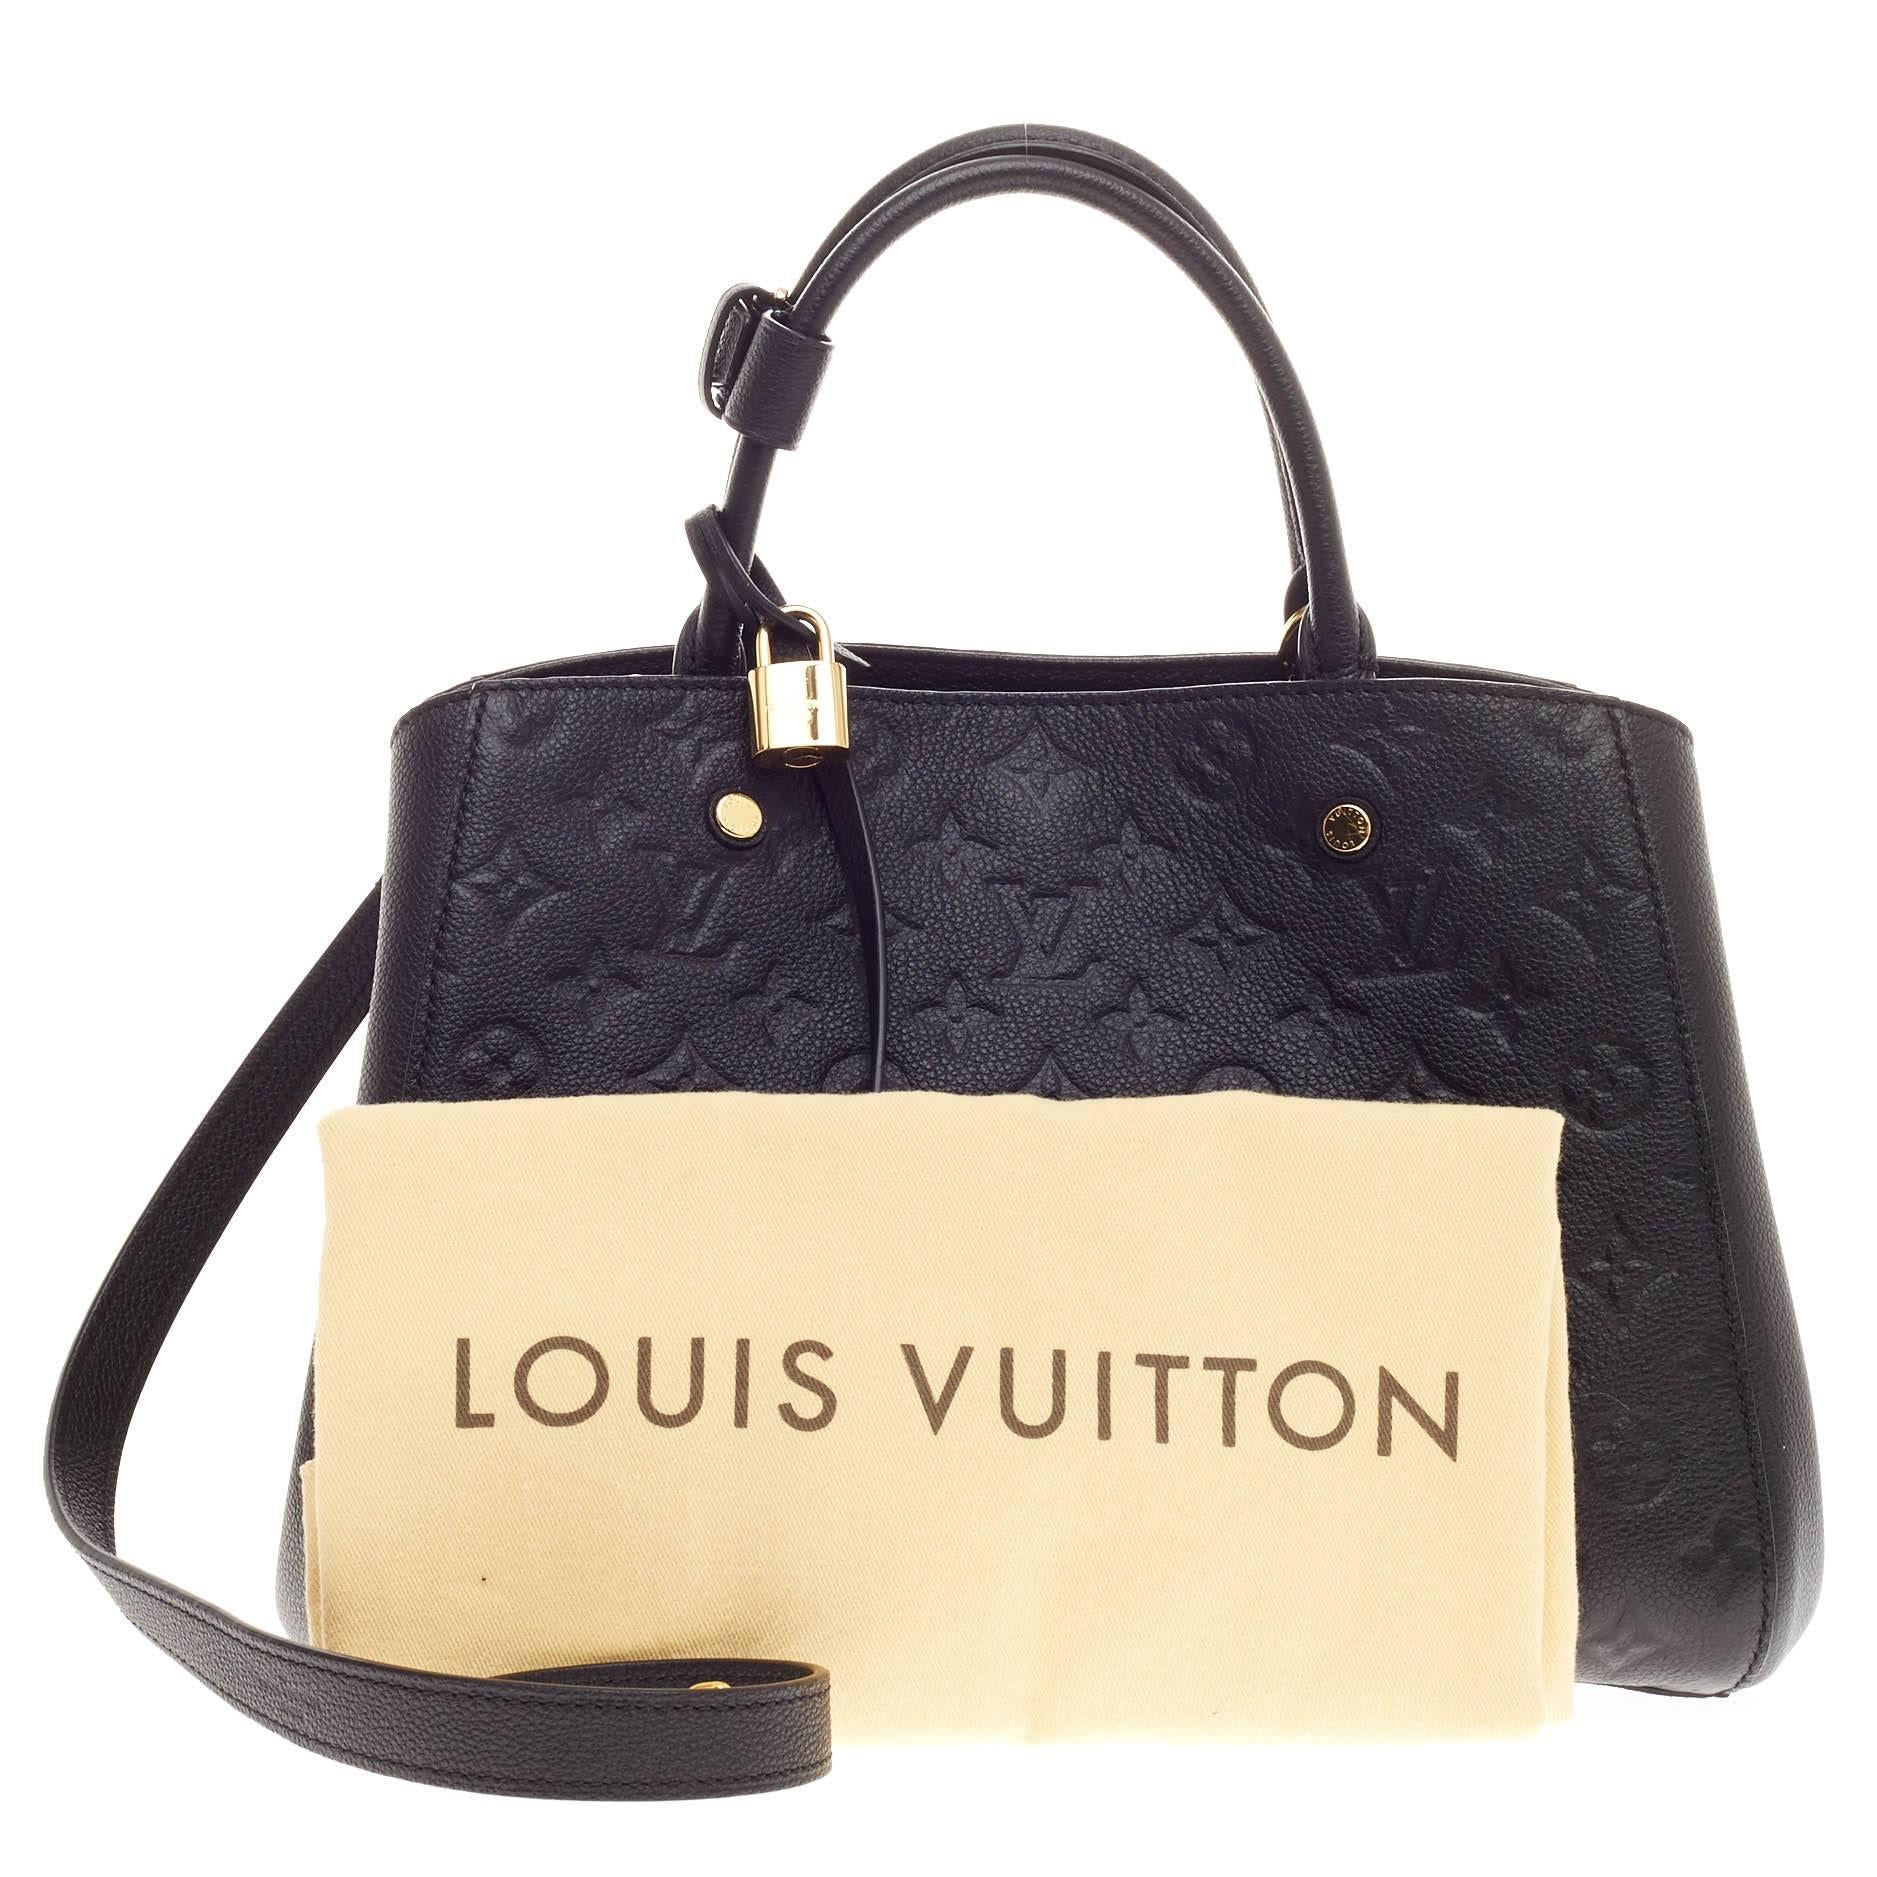 This authentic Louis Vuitton Montaigne Monogram Empreinte Leather MM named after the famed Parisian location is as sophisticated as it is sturdy. Crafted in classic noir black embossed monogram empreinte leather, this luxurious and refined bag